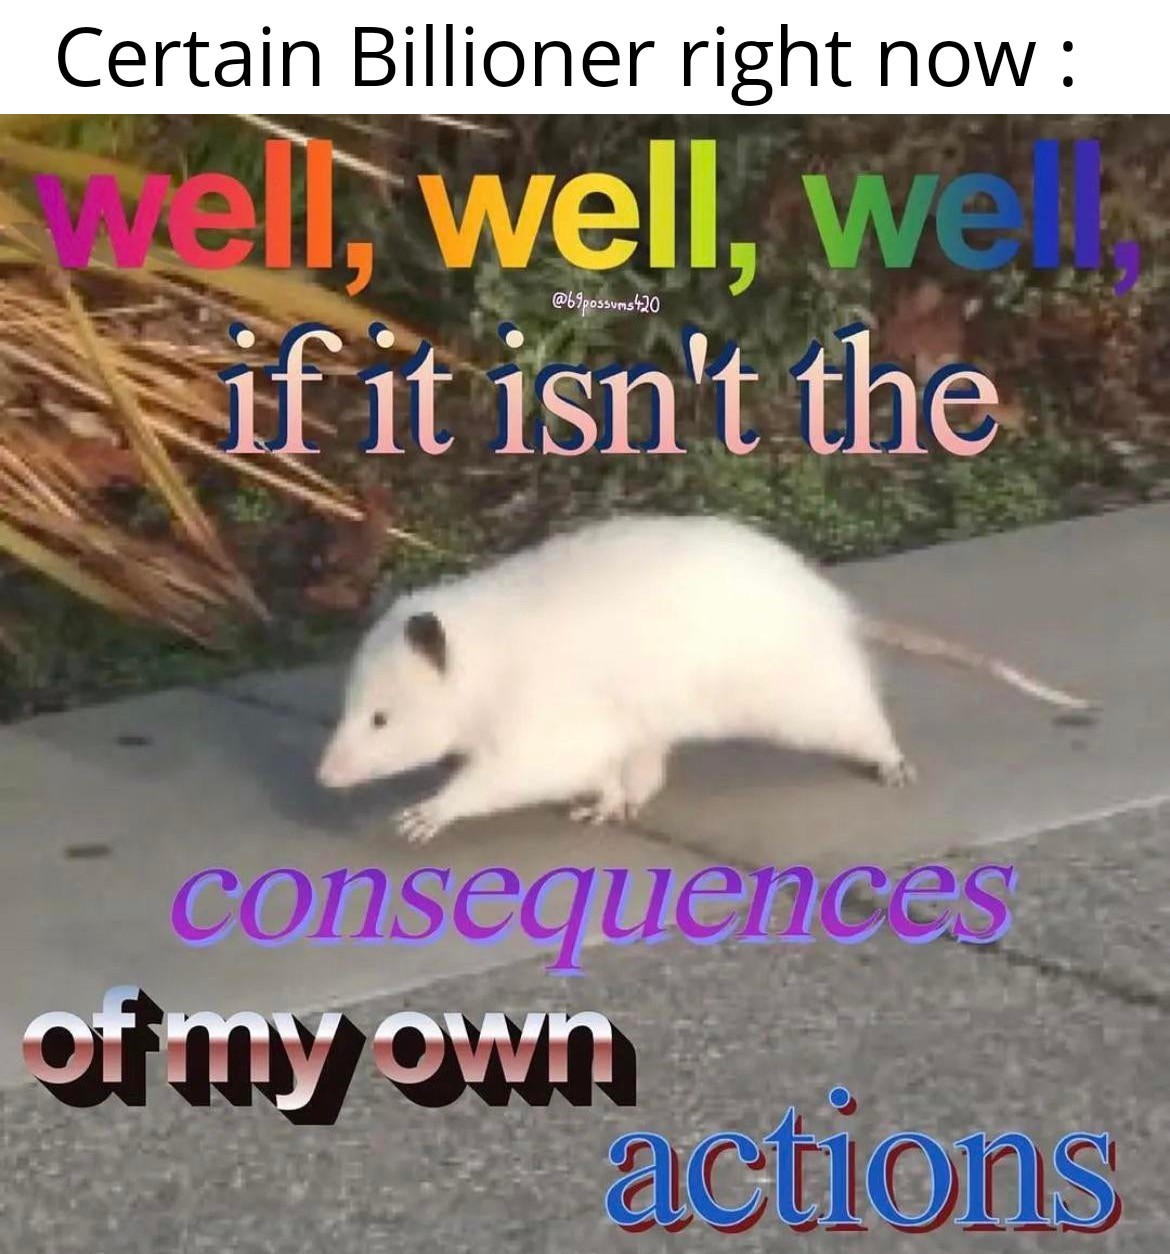 dank memes and funny pics - opossum memes - Certain Billioner right now well, well, we if it isn't the 420 consequences of my own actions